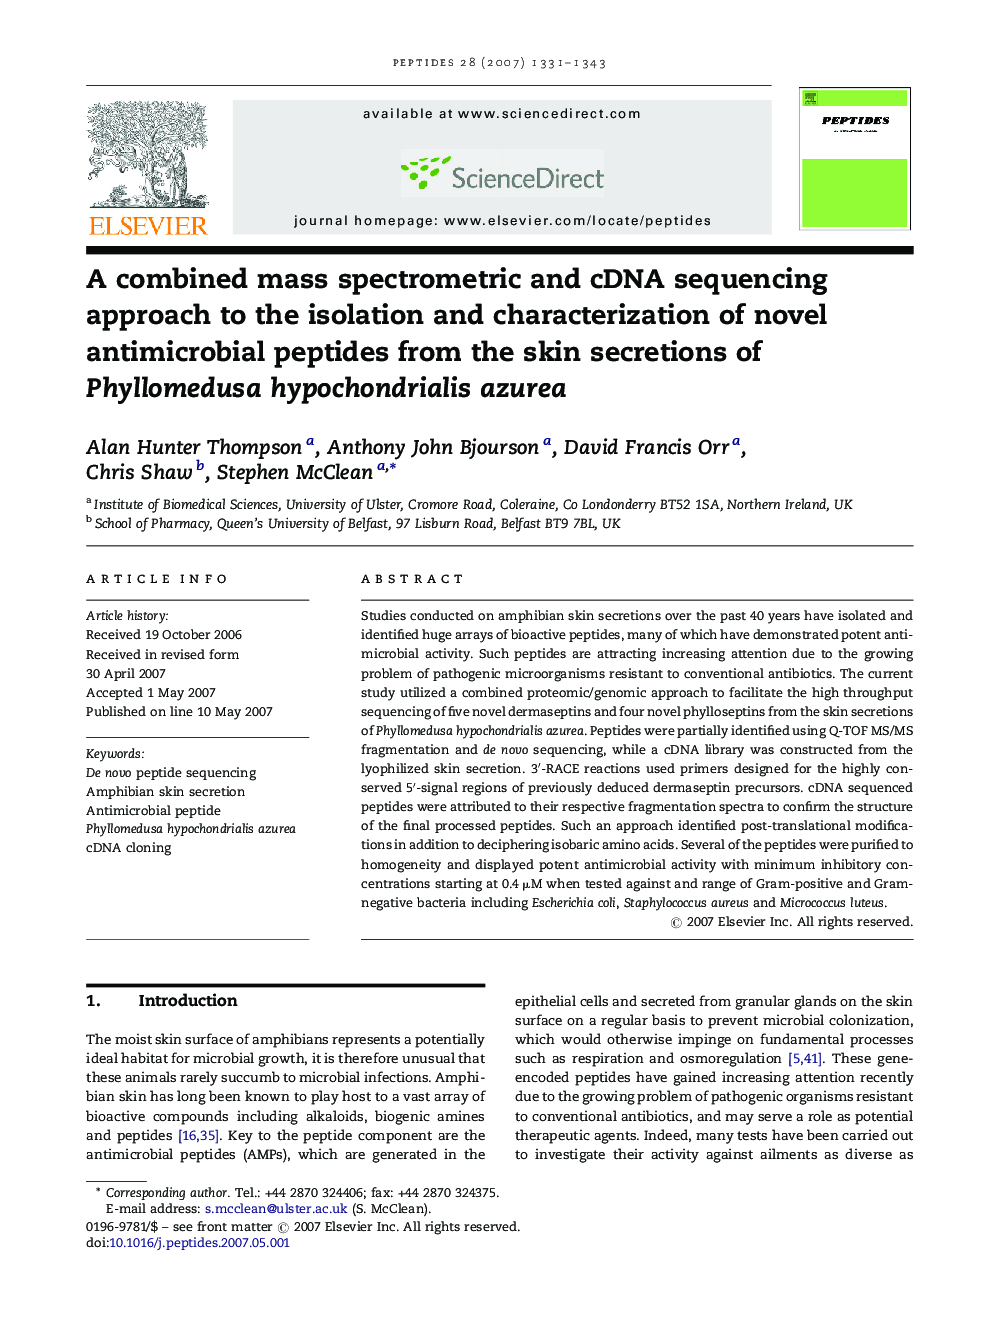 A combined mass spectrometric and cDNA sequencing approach to the isolation and characterization of novel antimicrobial peptides from the skin secretions of Phyllomedusa hypochondrialis azurea